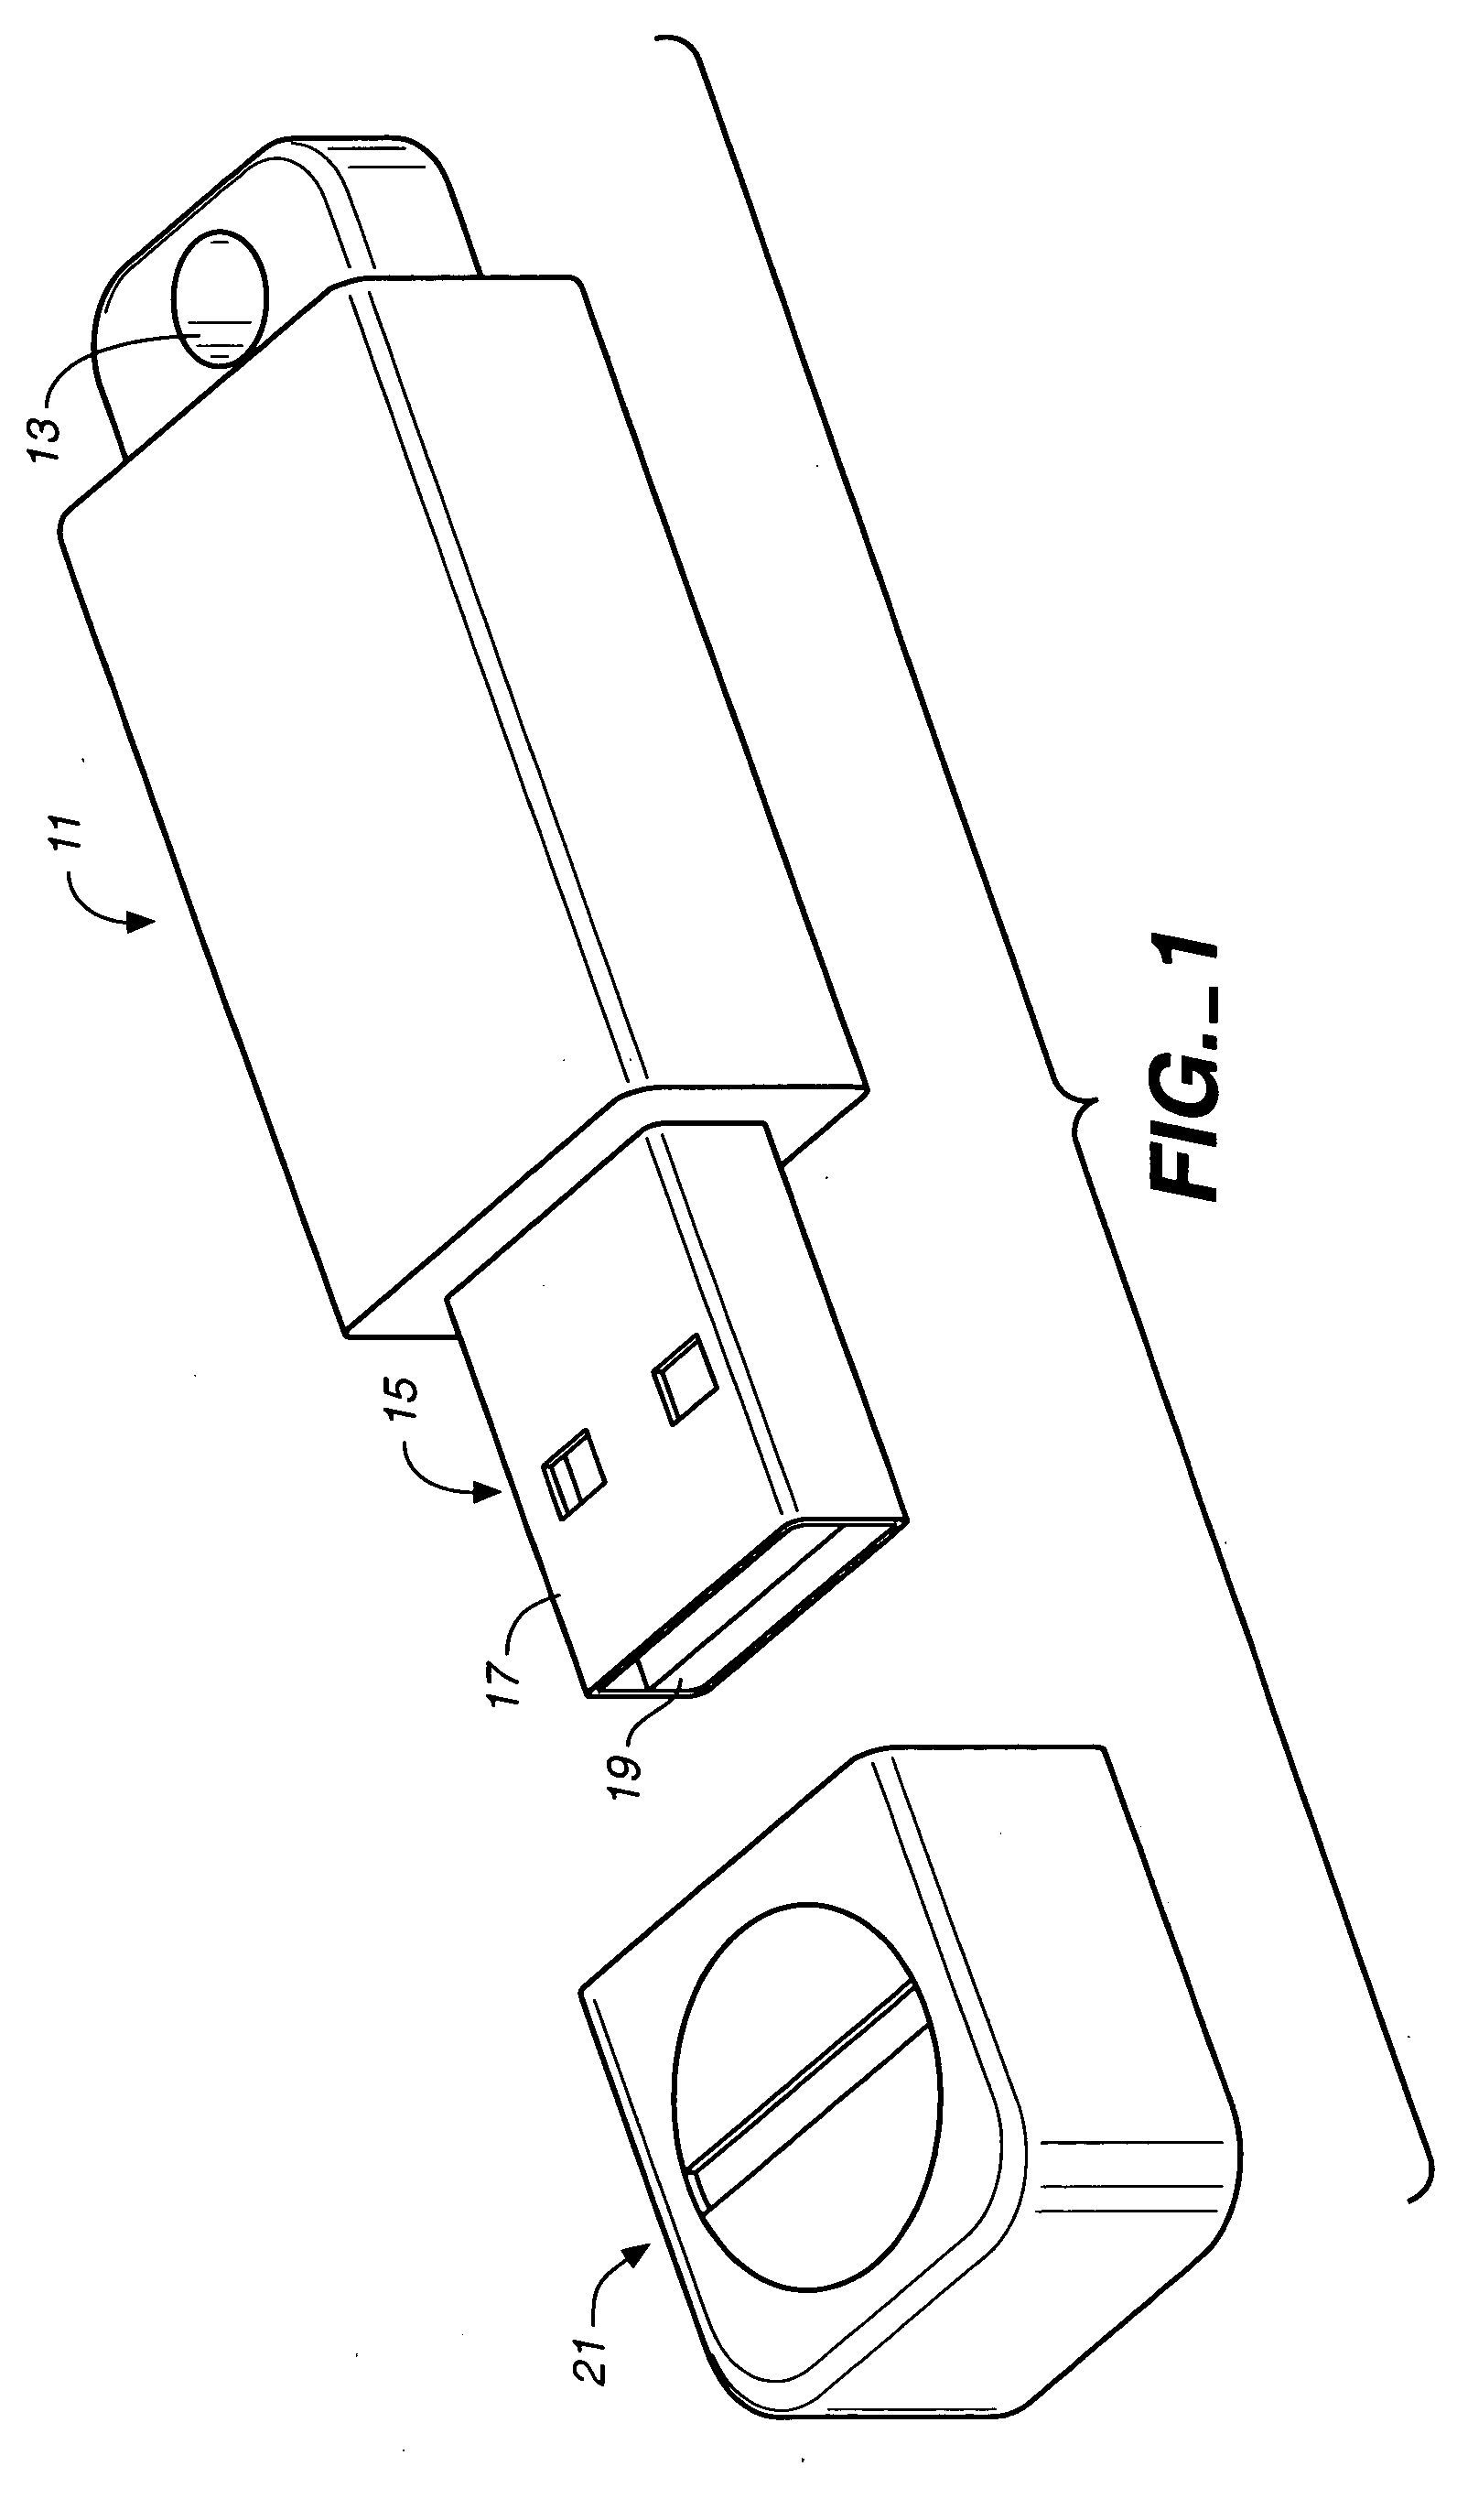 Portable memory devices with removable caps that effect operation of the devices when attached